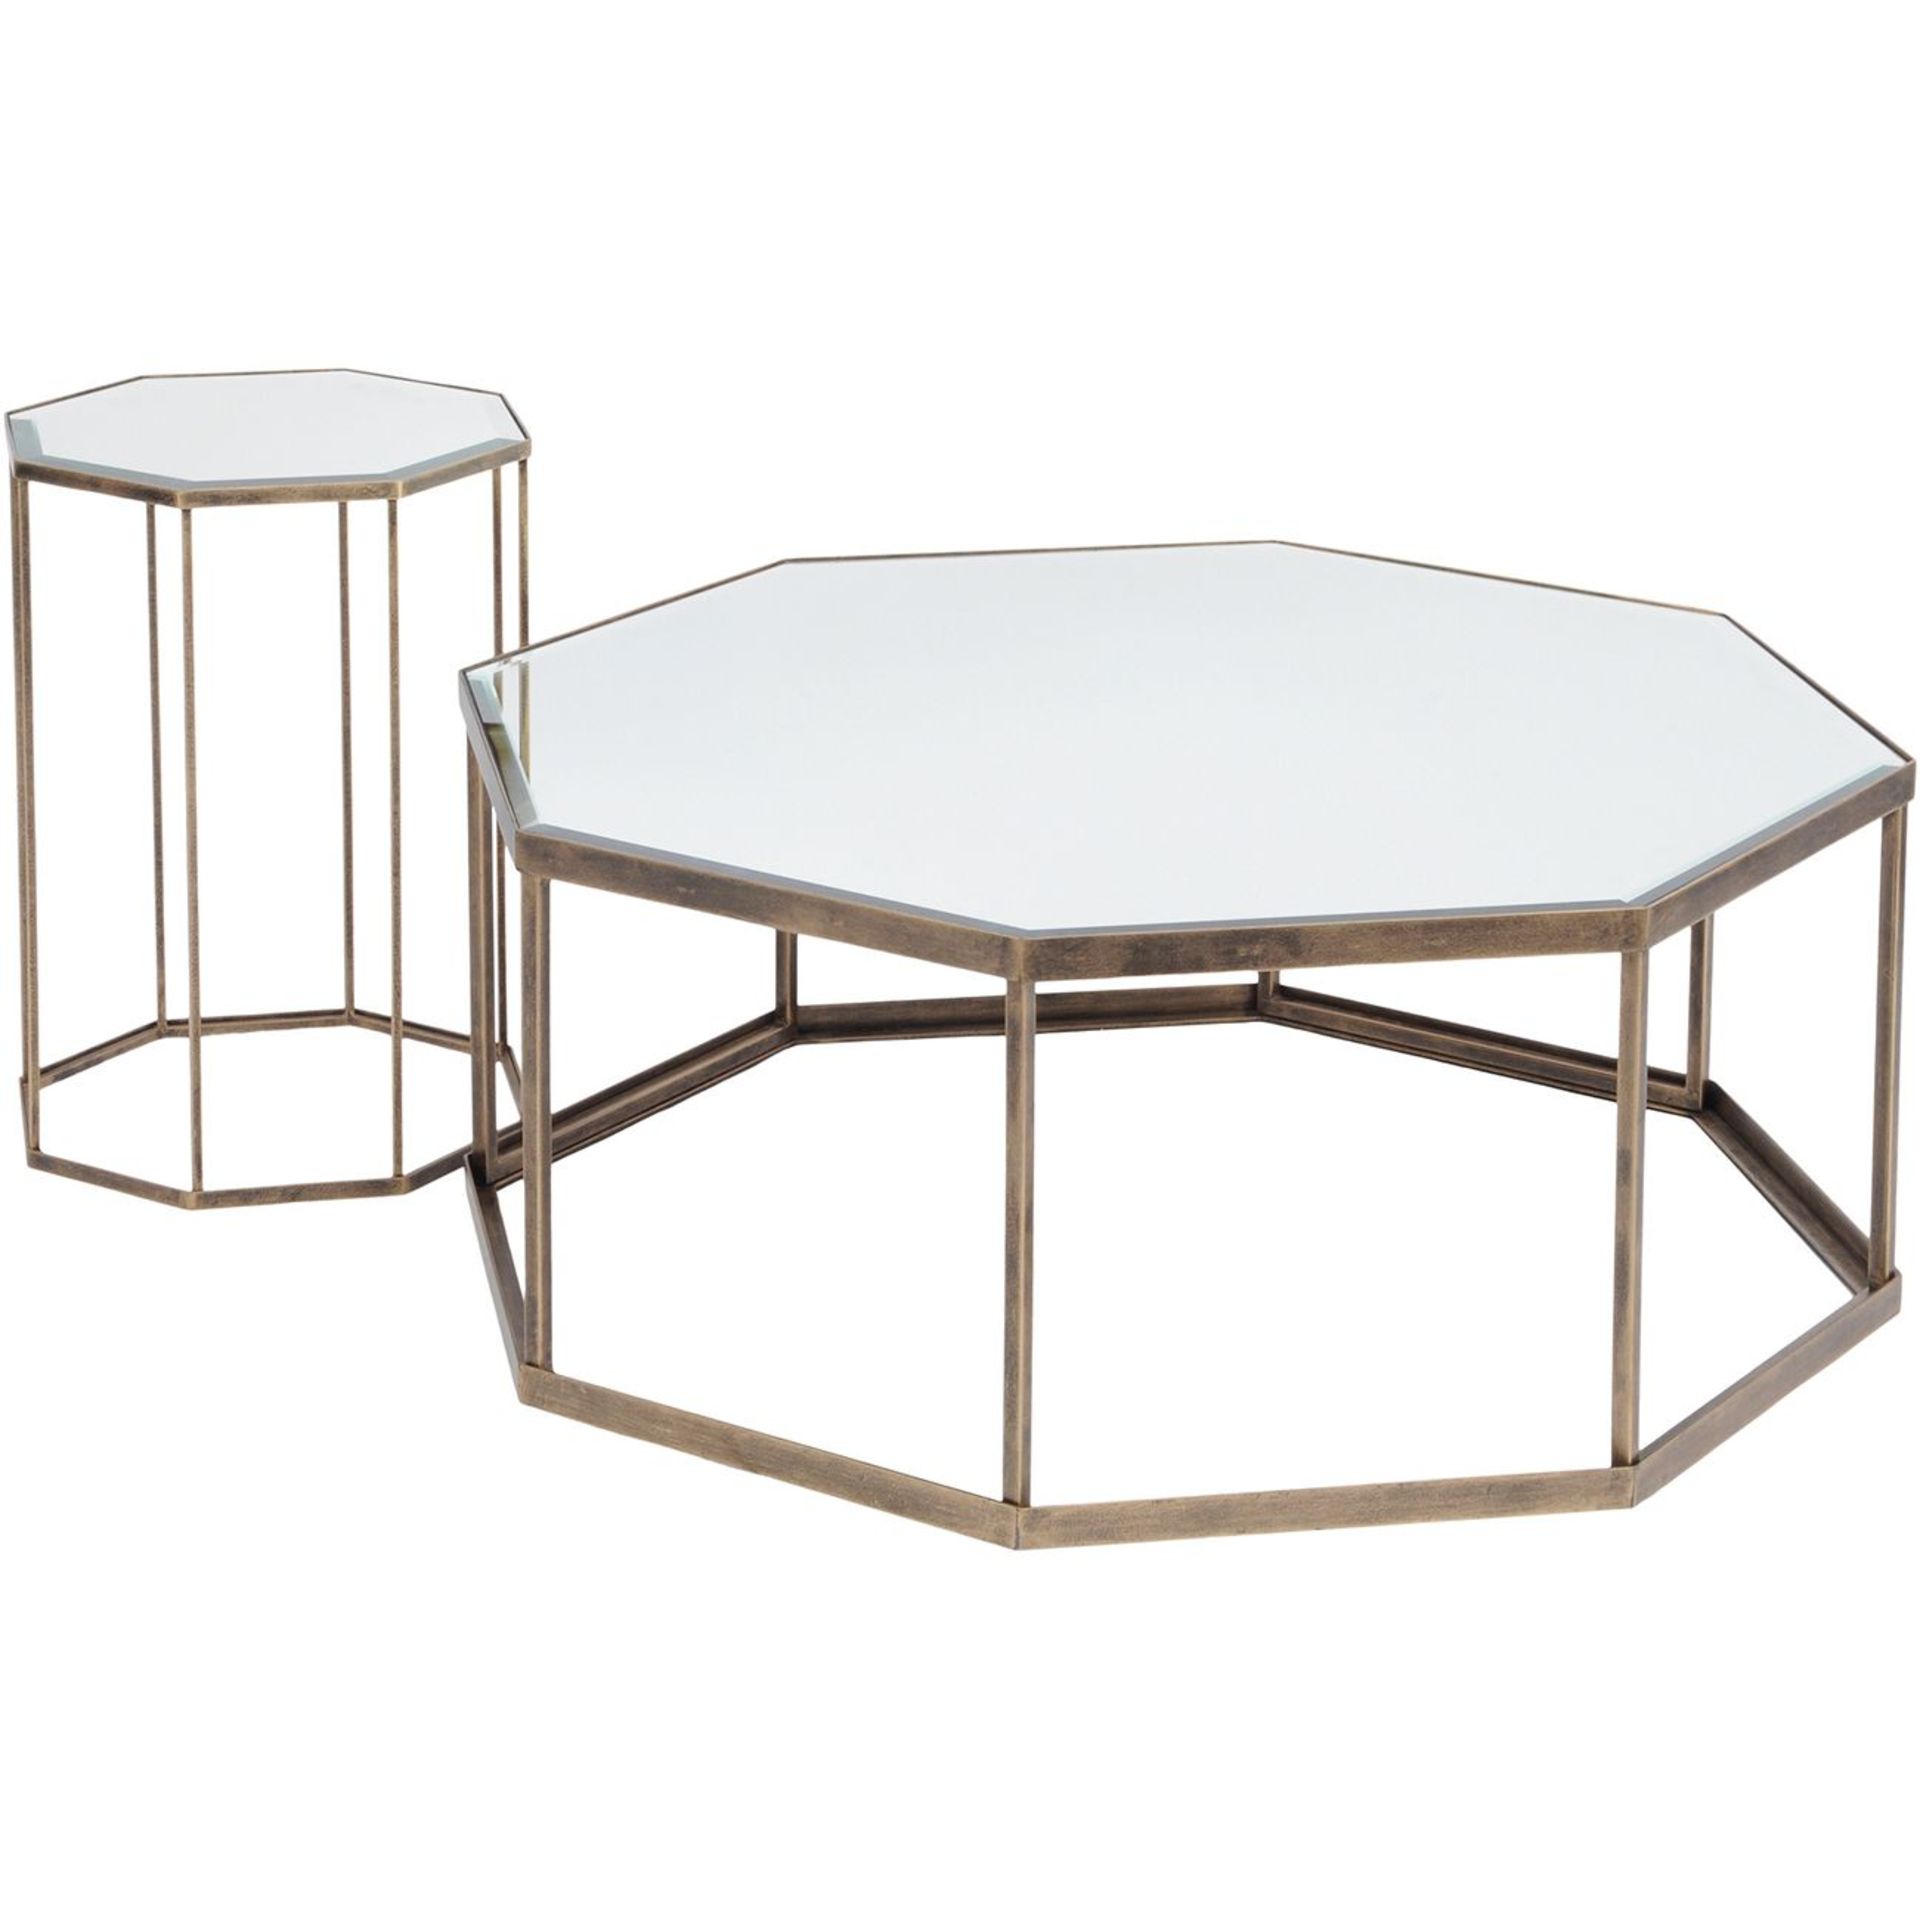 Occtaine Octagonal End Table - Image 2 of 2